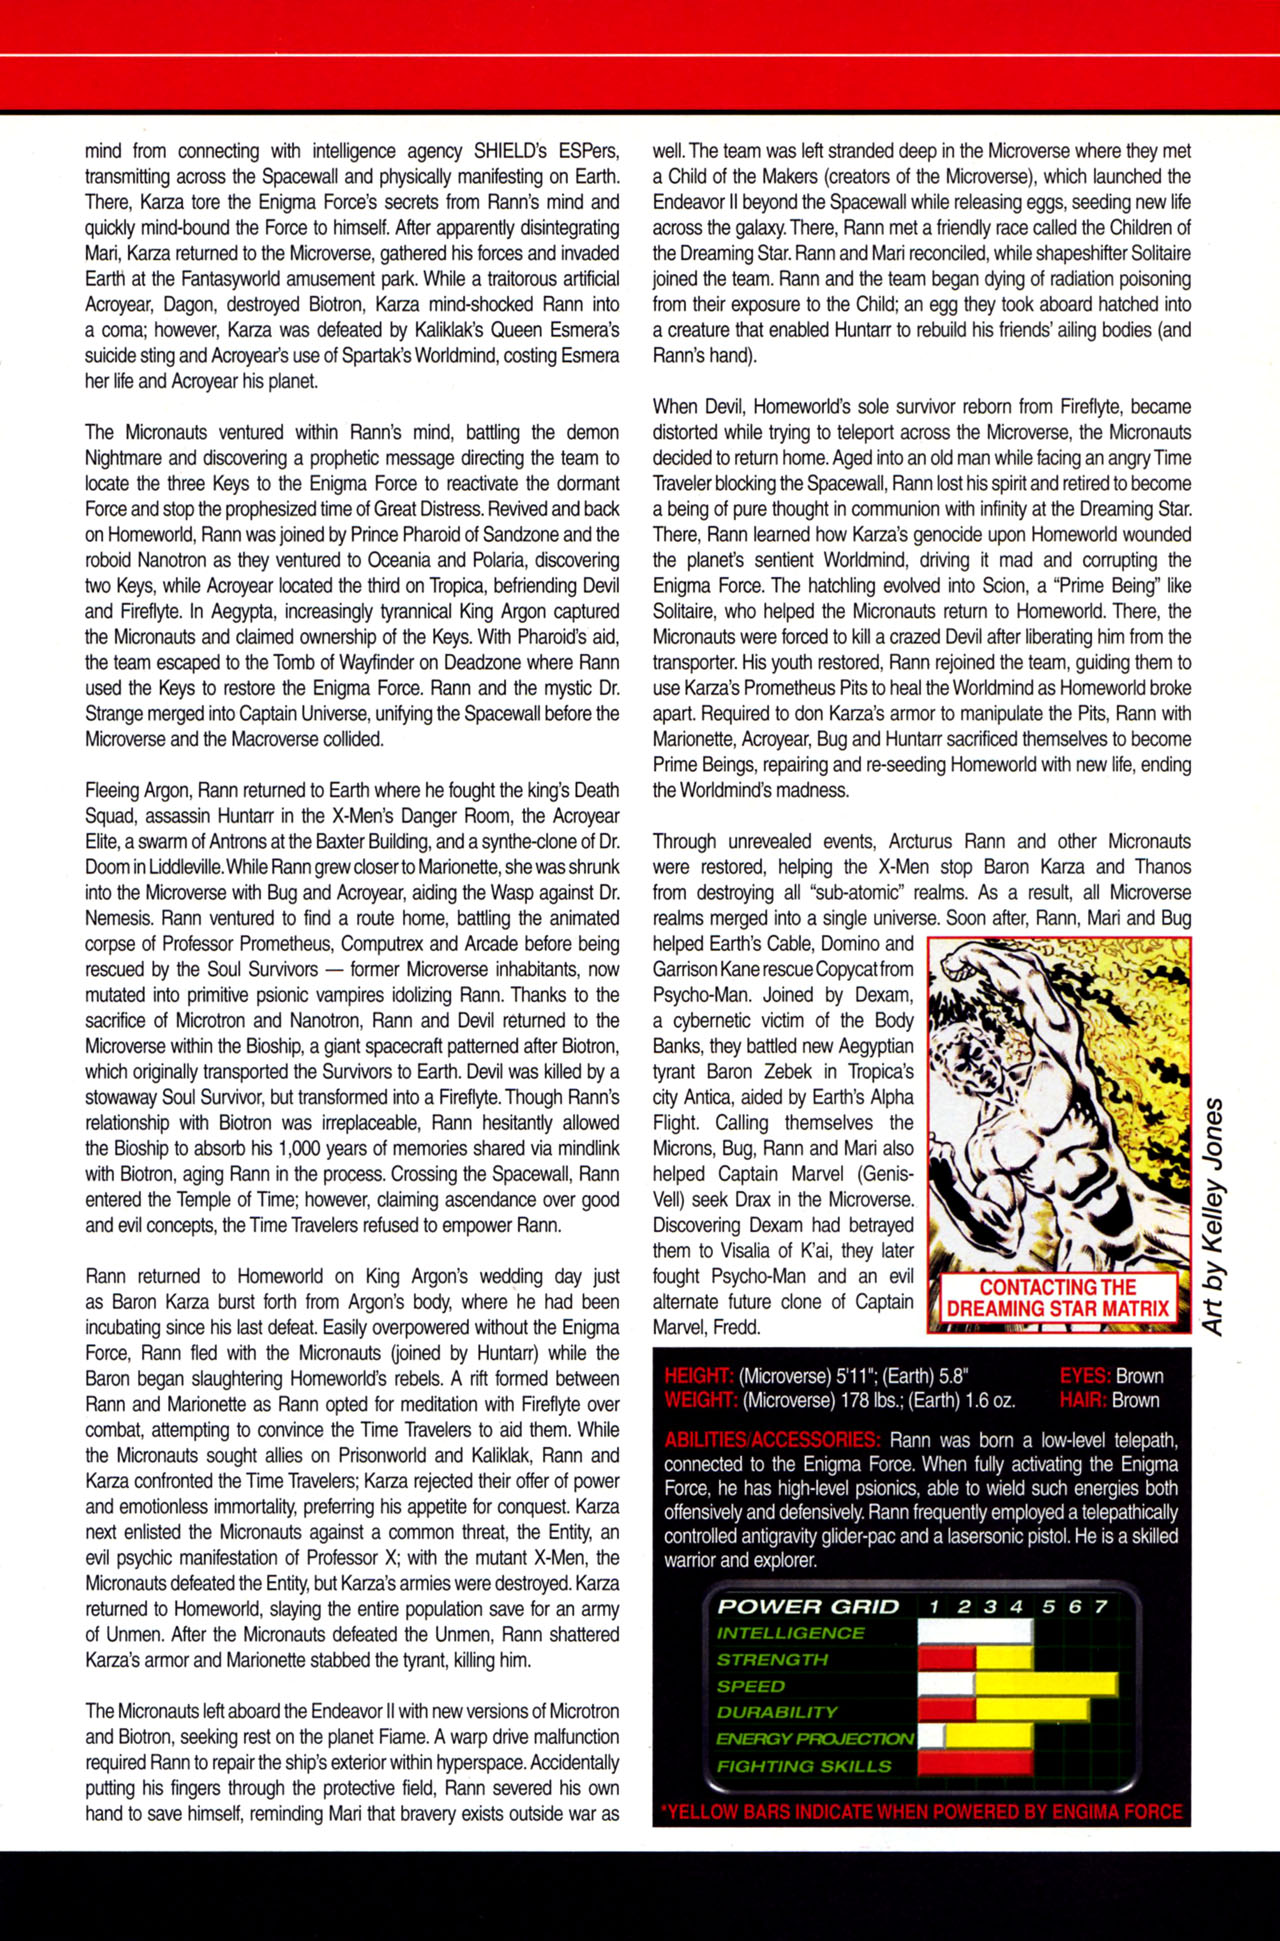 Marvel Universe biography page 2 for Arcturus Rann